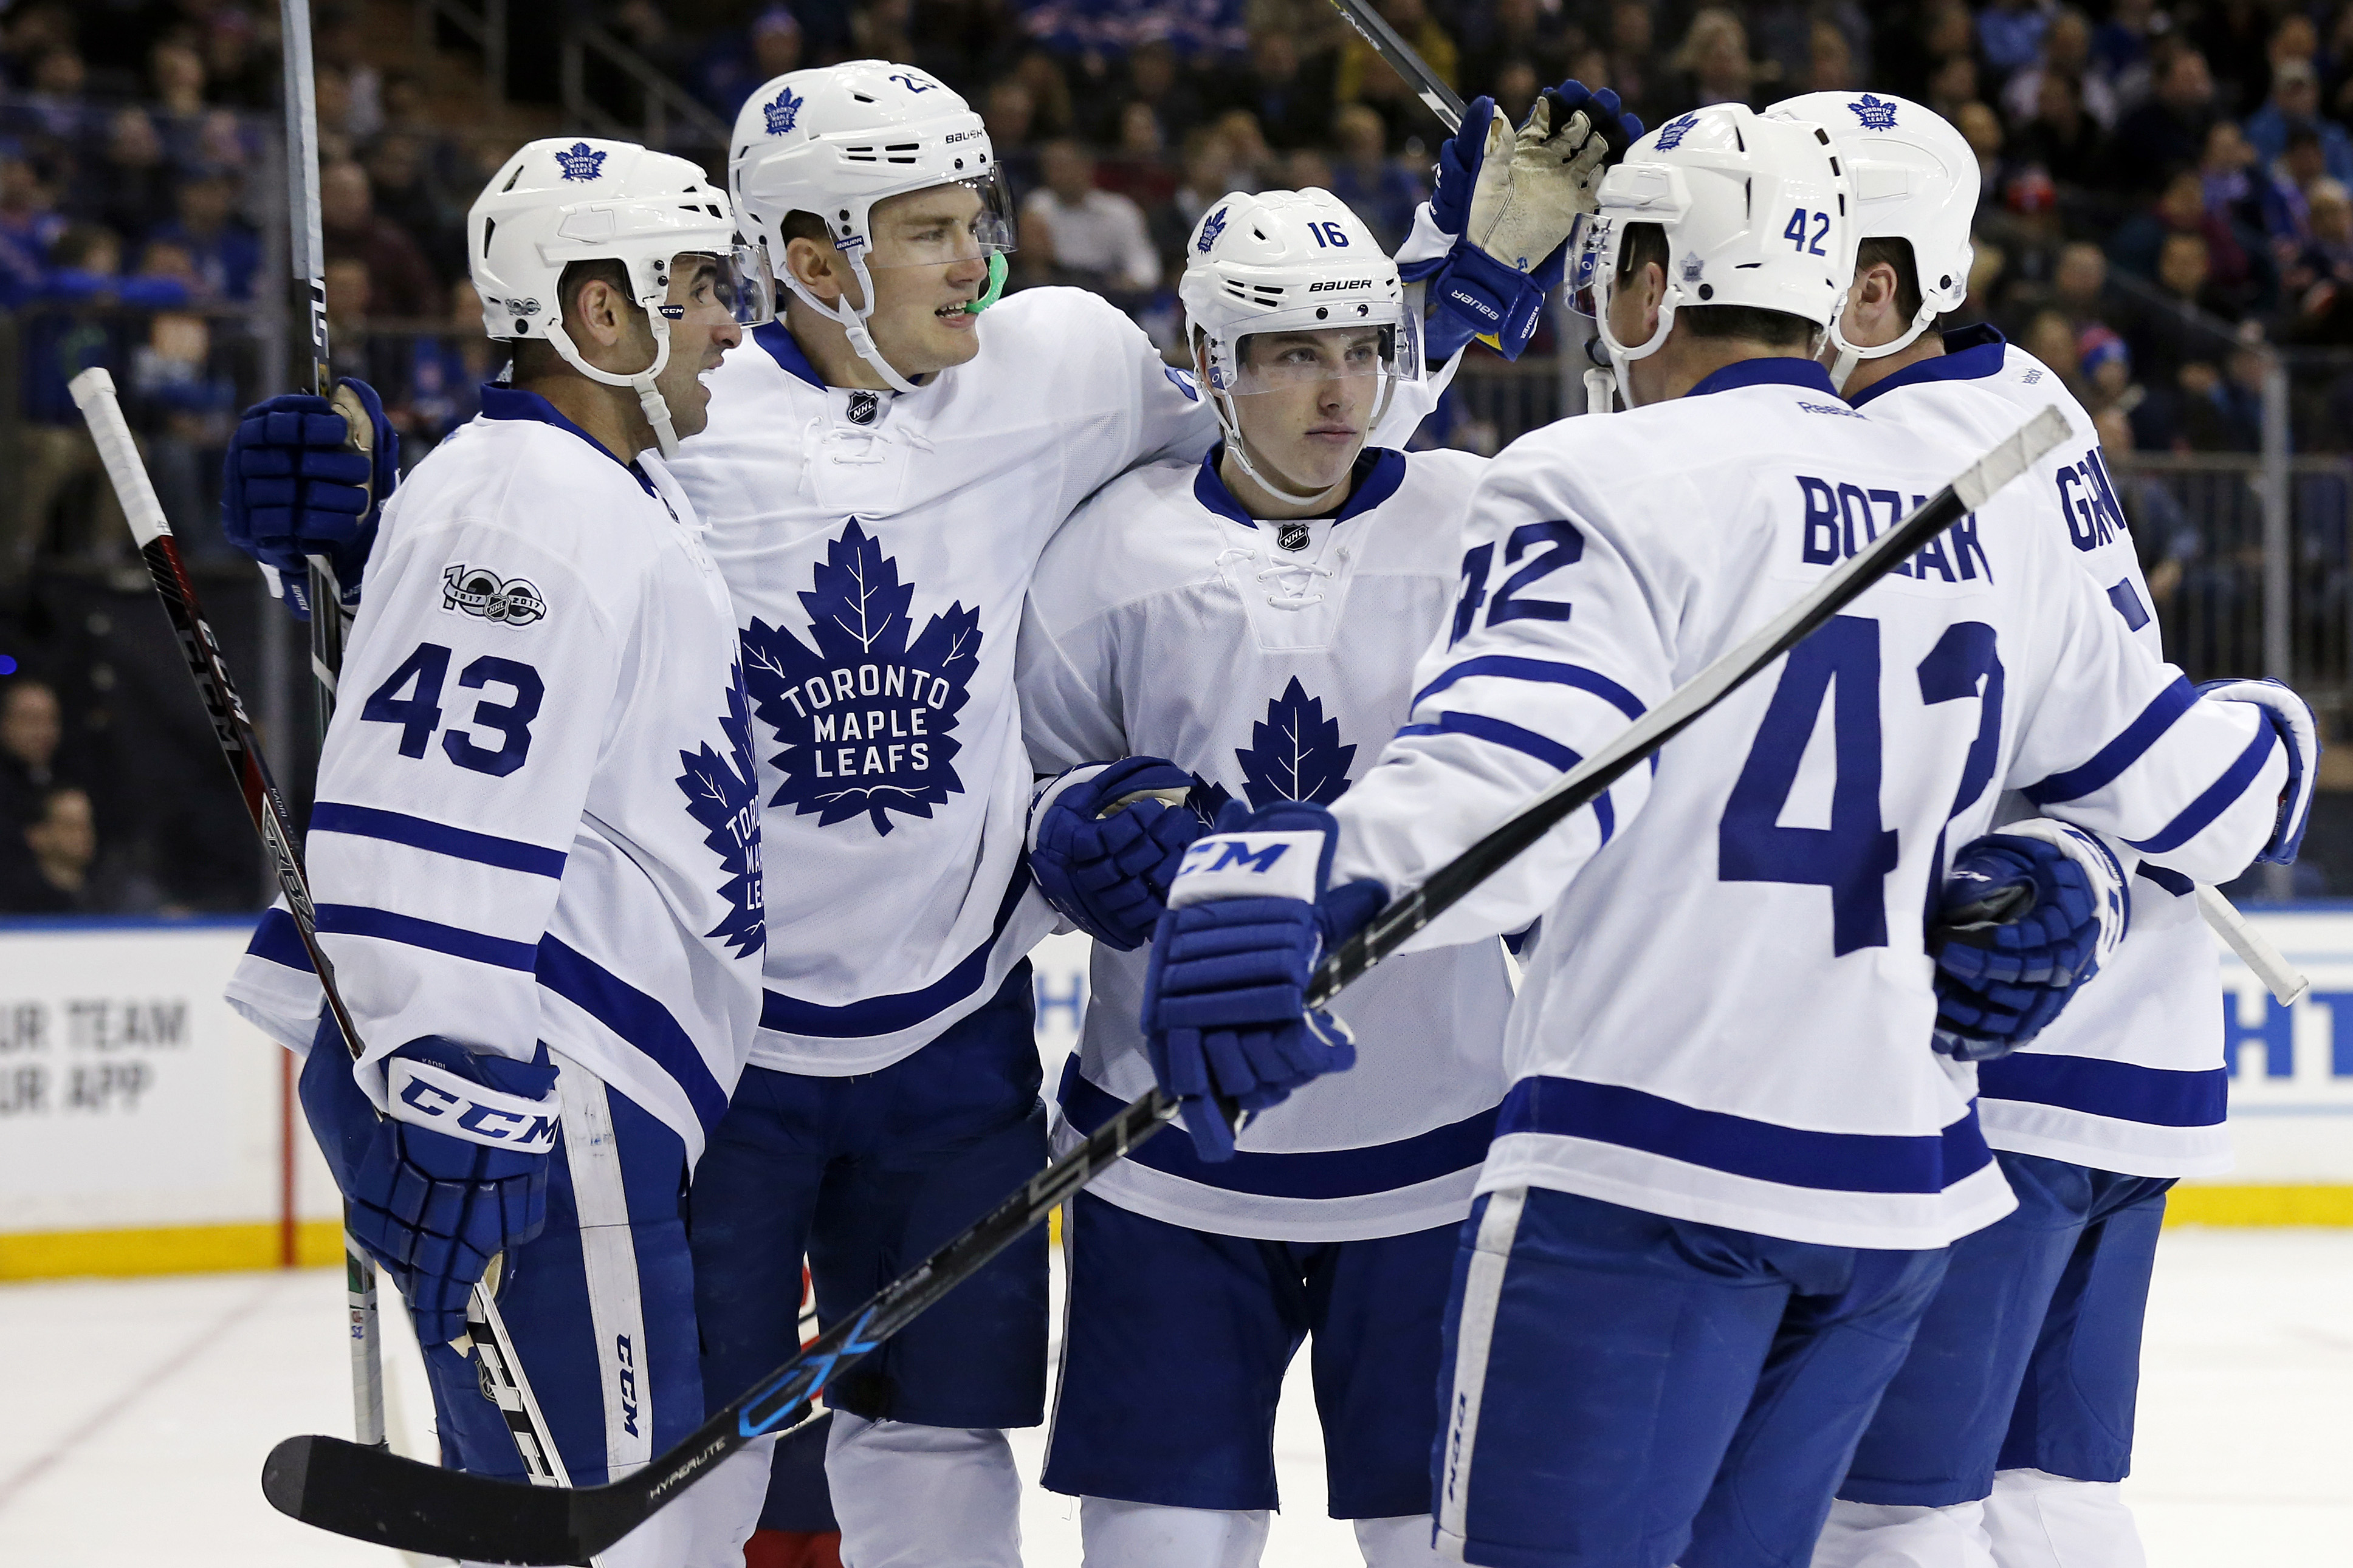 Kasperi Kapanen Deserves a Shot With the Maple Leafs - Tip of the Tower